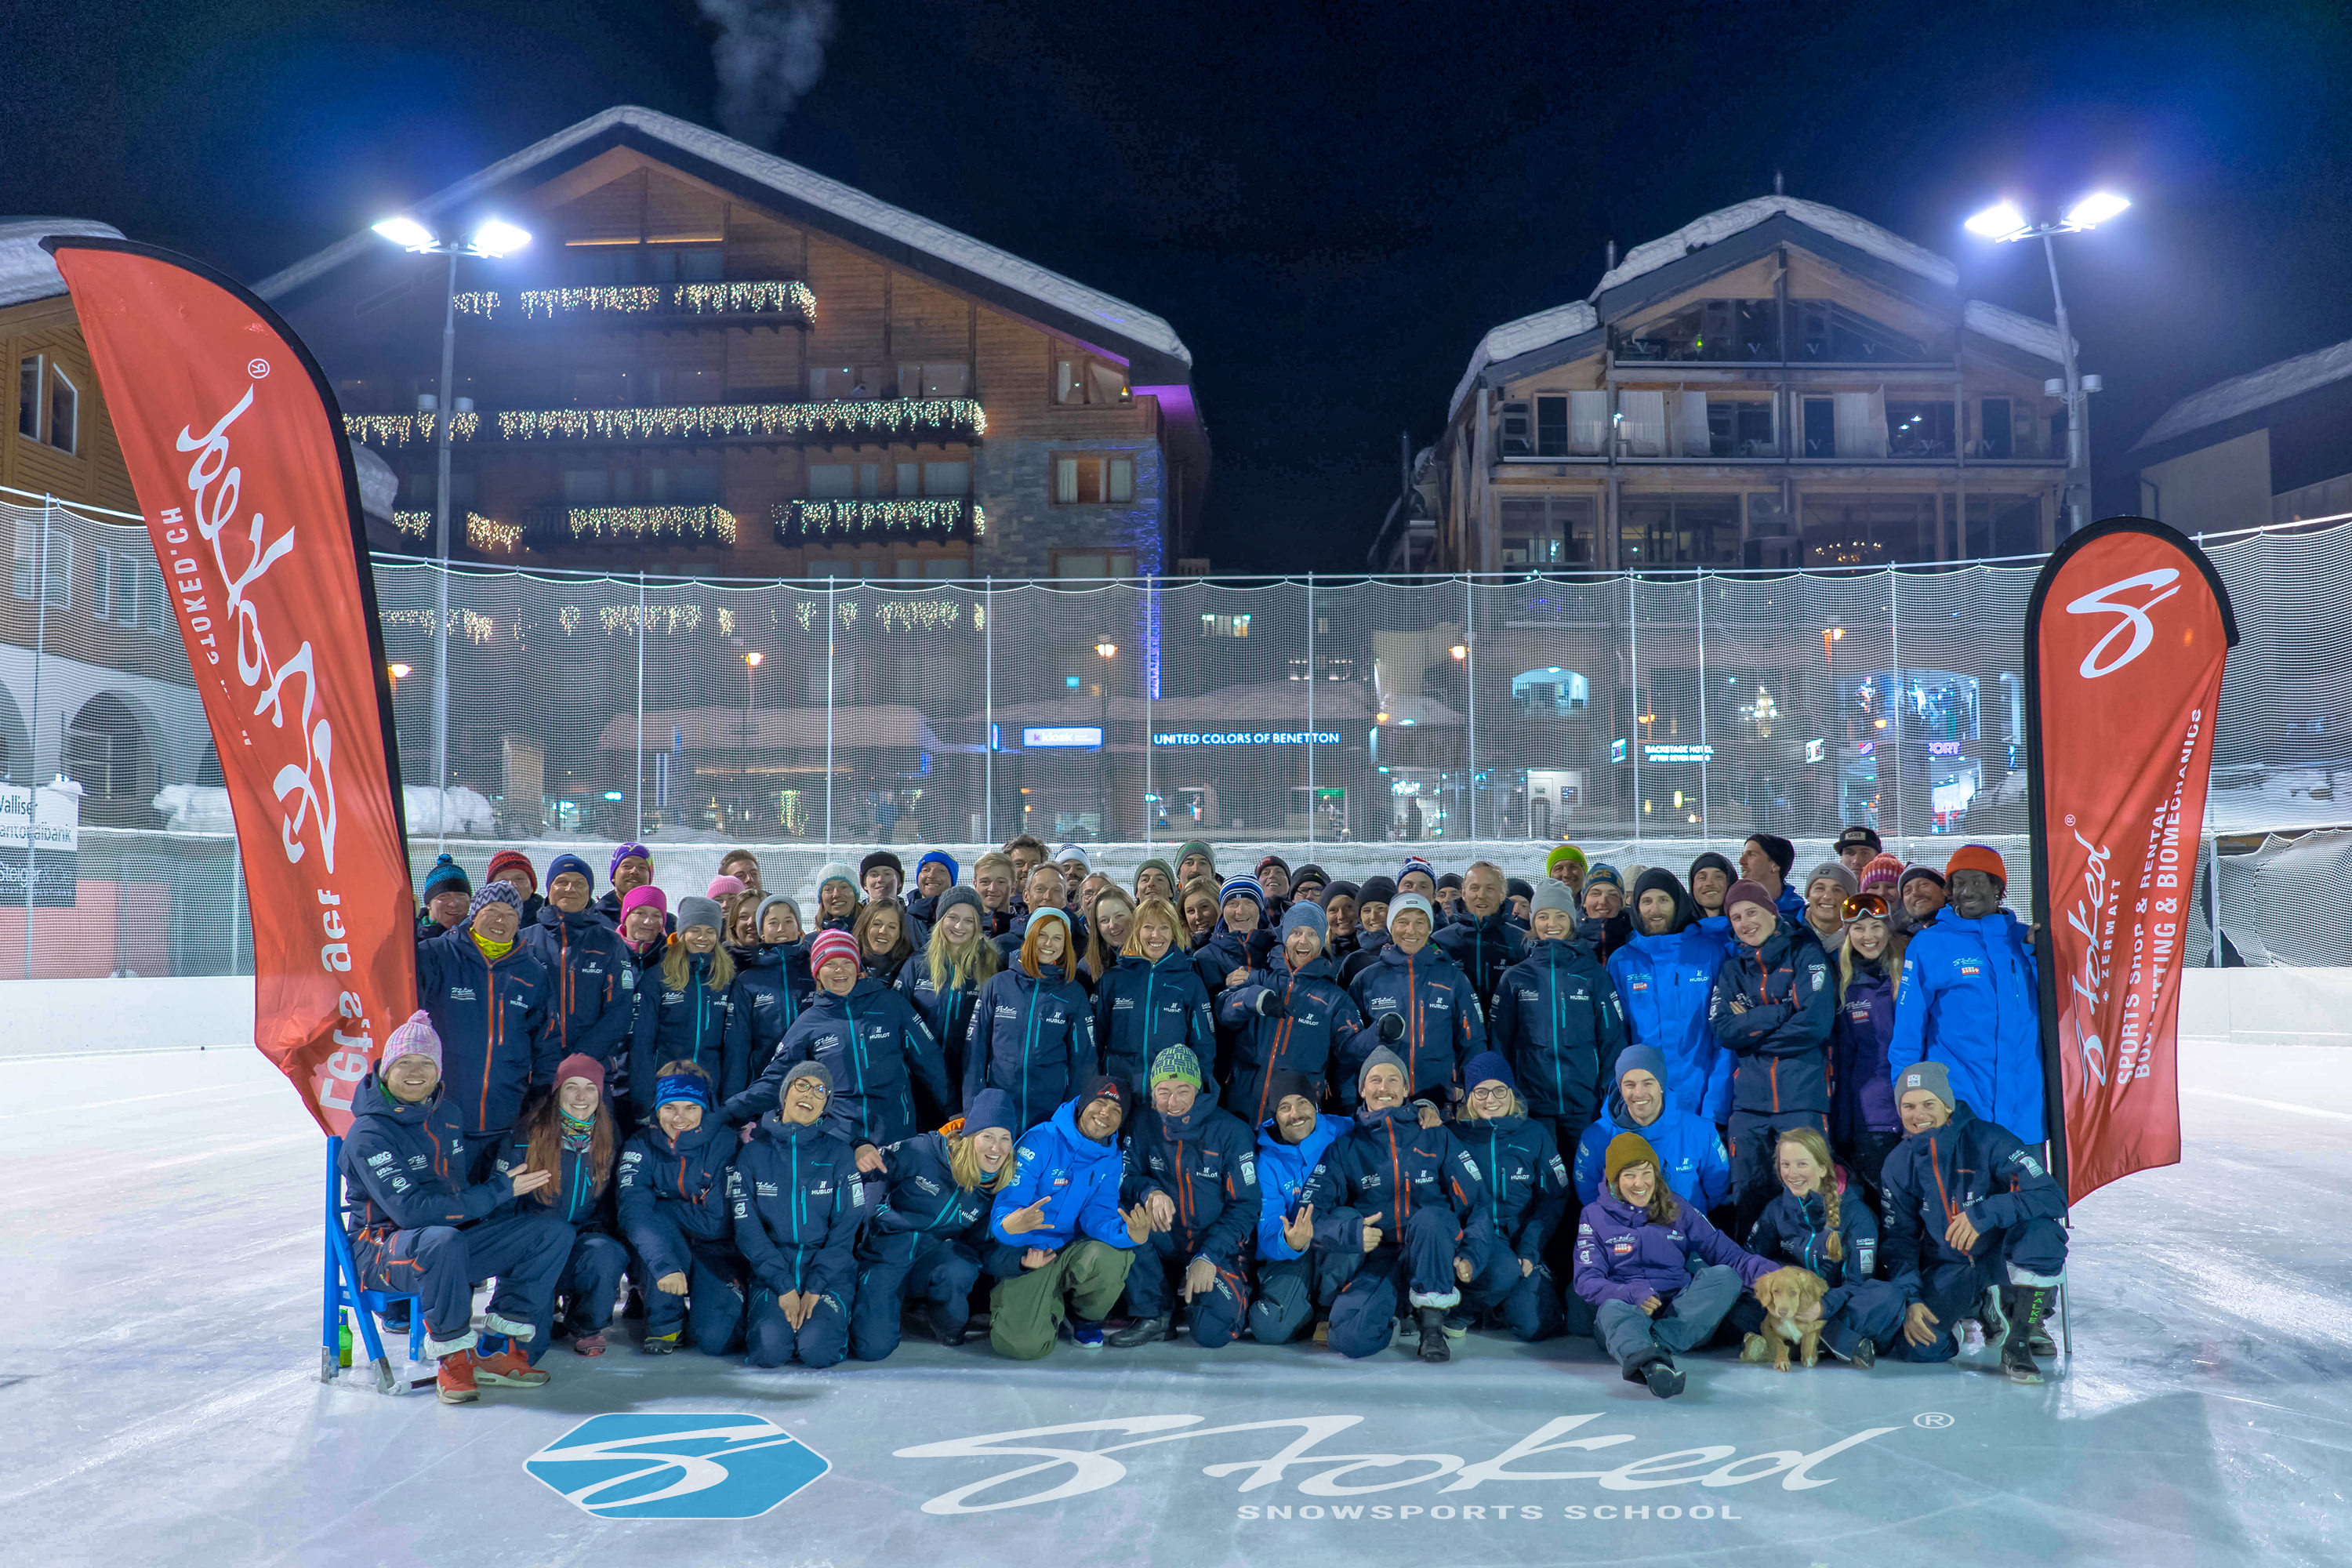 Stoked Snowsports school, group photo of team and instructors